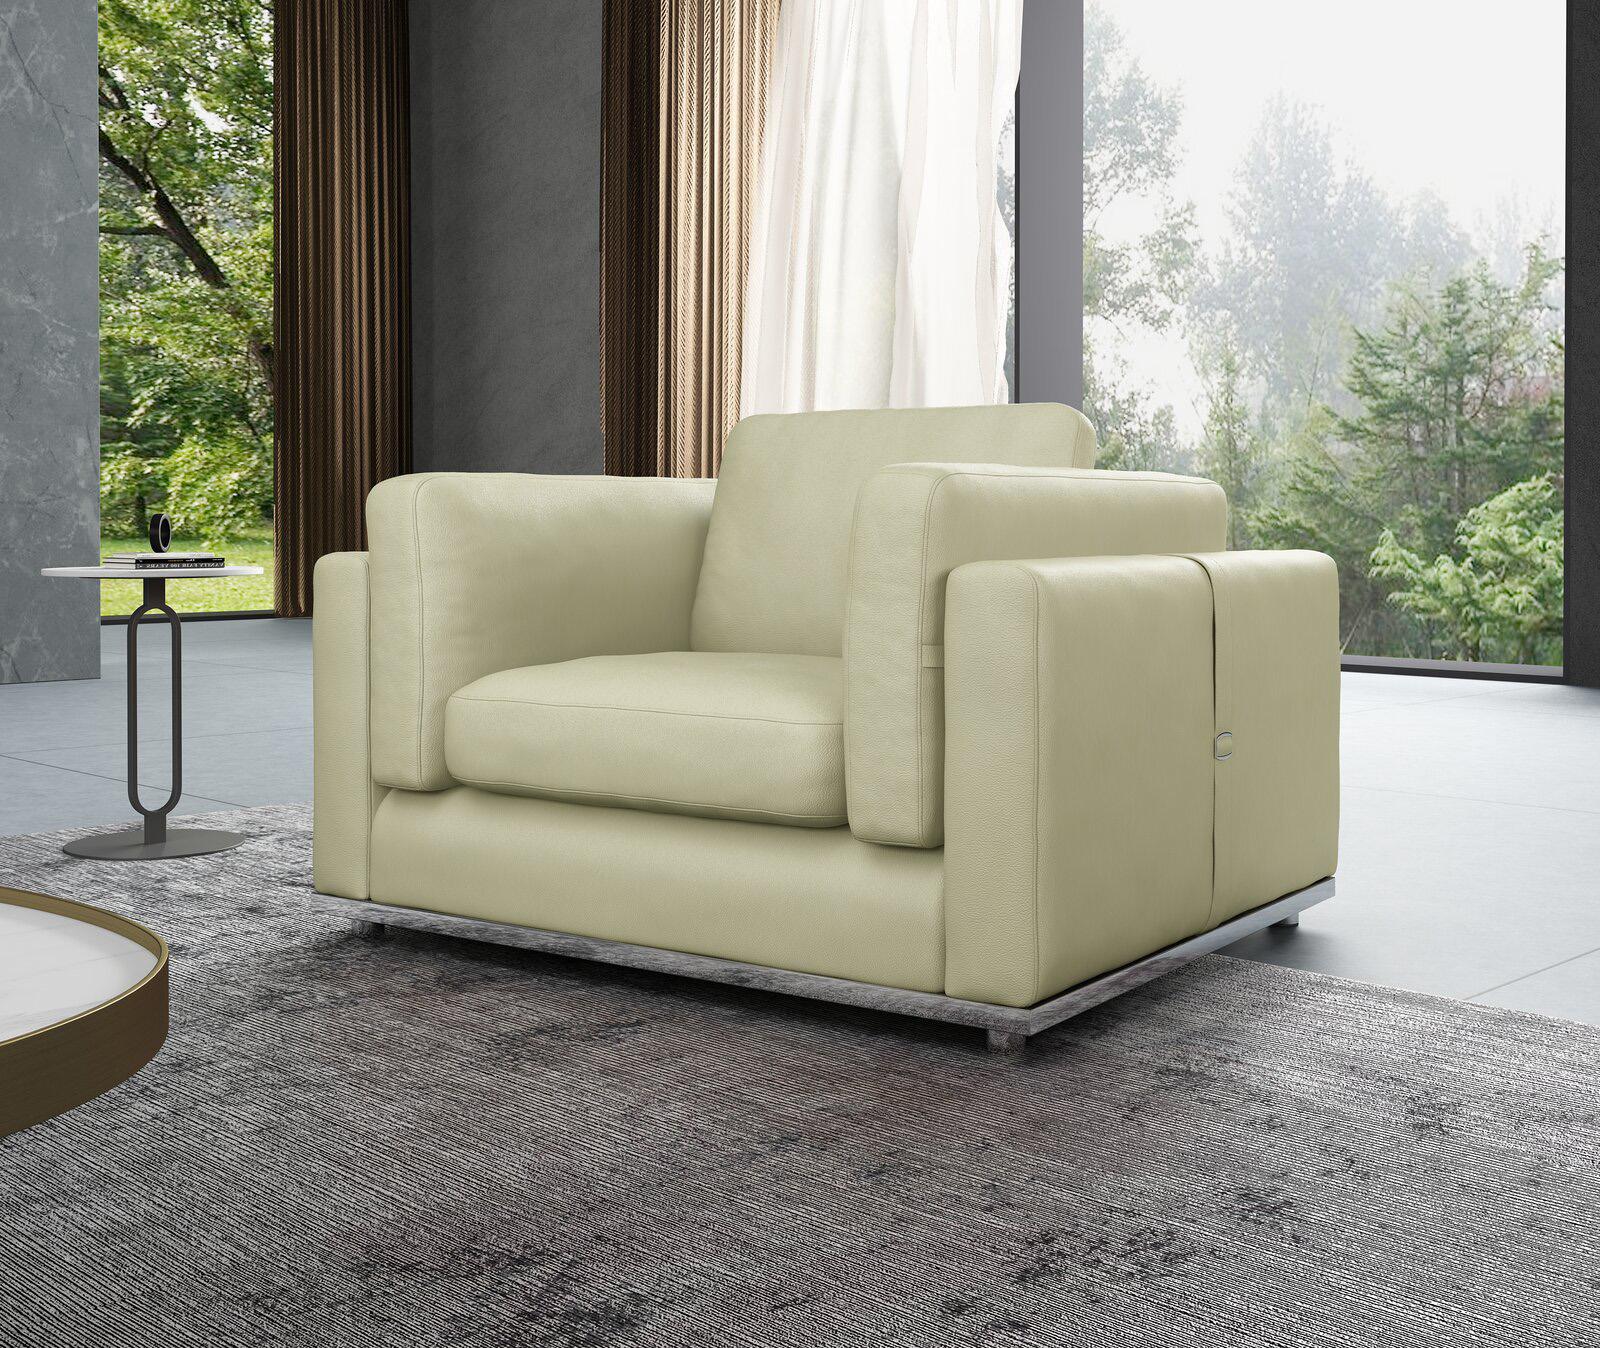 Contemporary, Modern Arm Chair PICASSO EF-25551-C in Off-White Leather